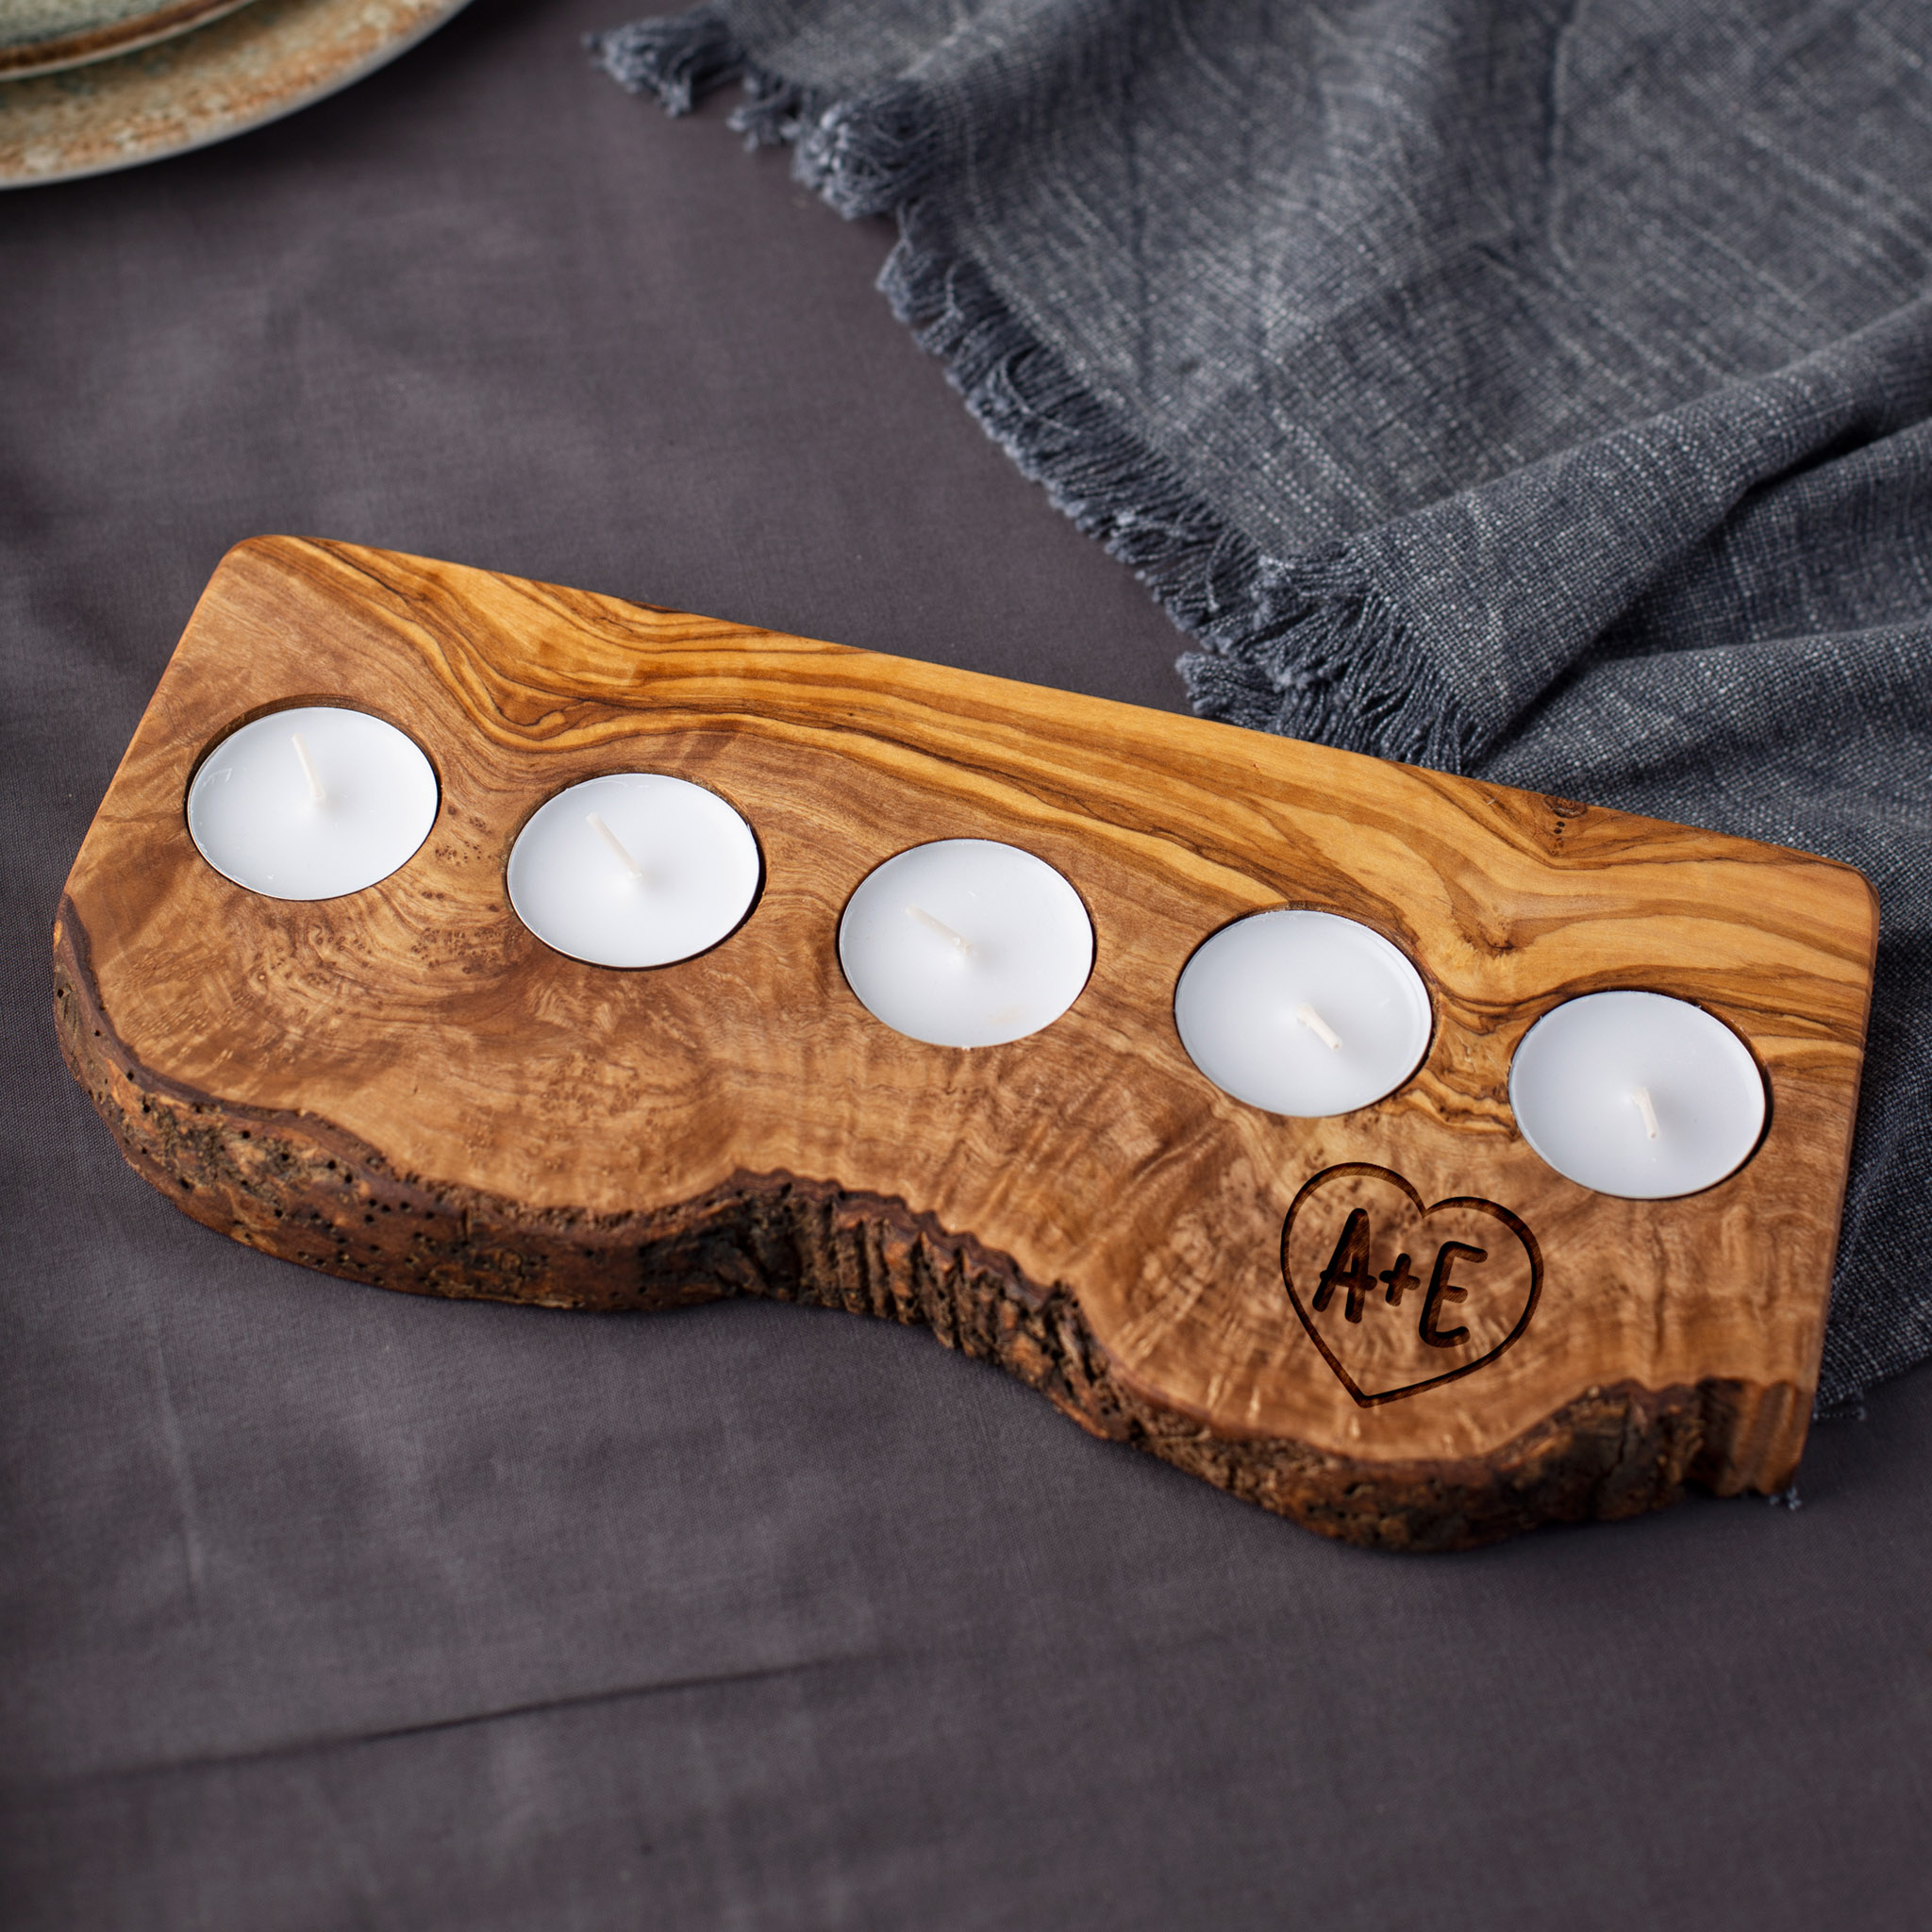 A wooden tealight candle holder with four candles on it.